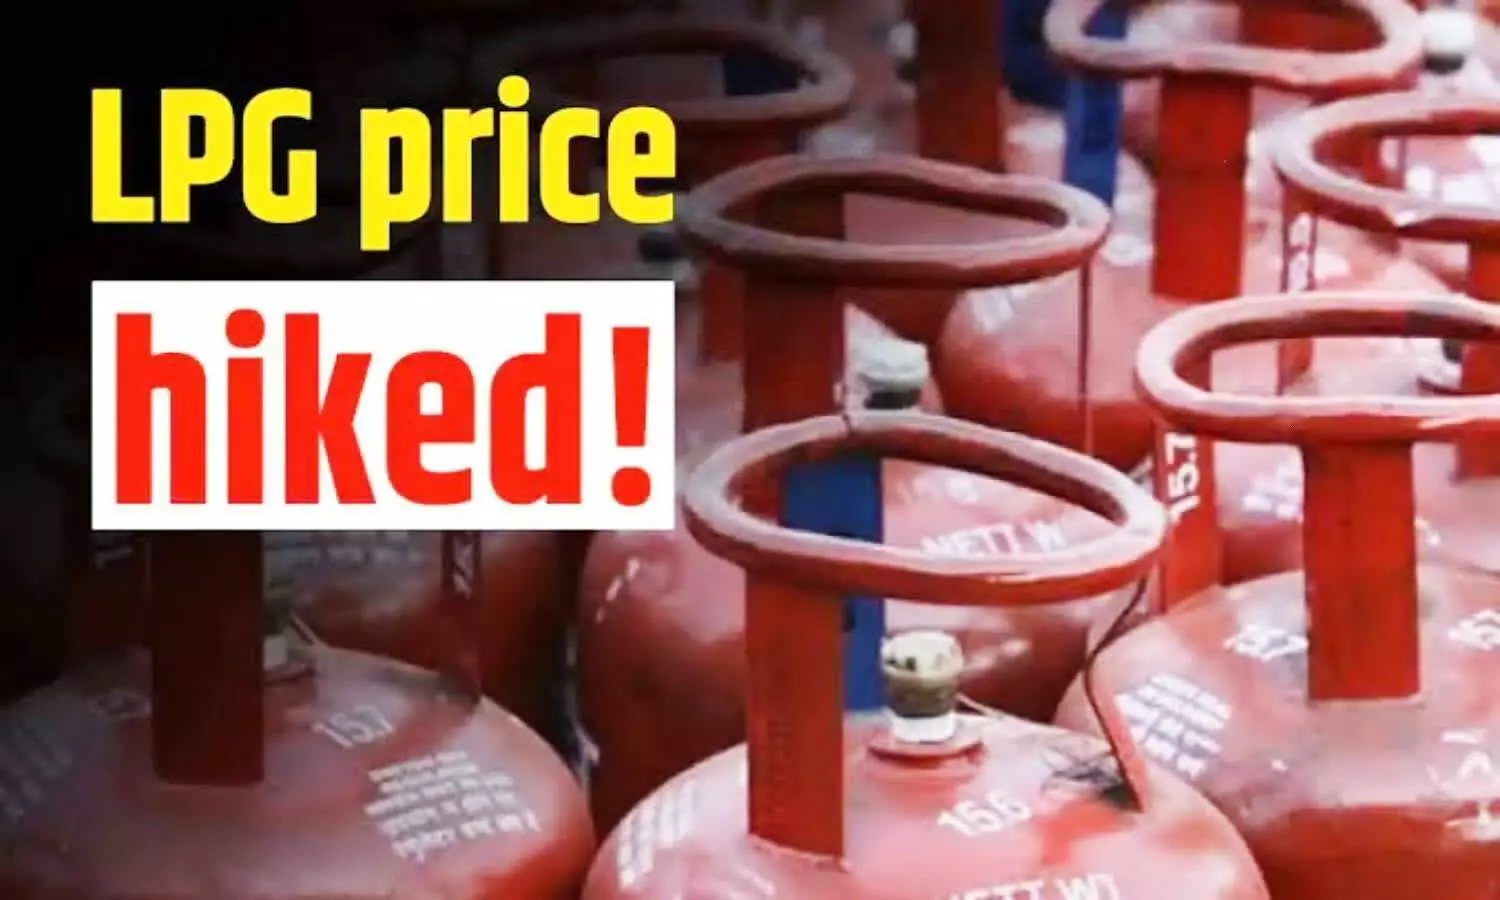 LPG gas cylinder price hiked